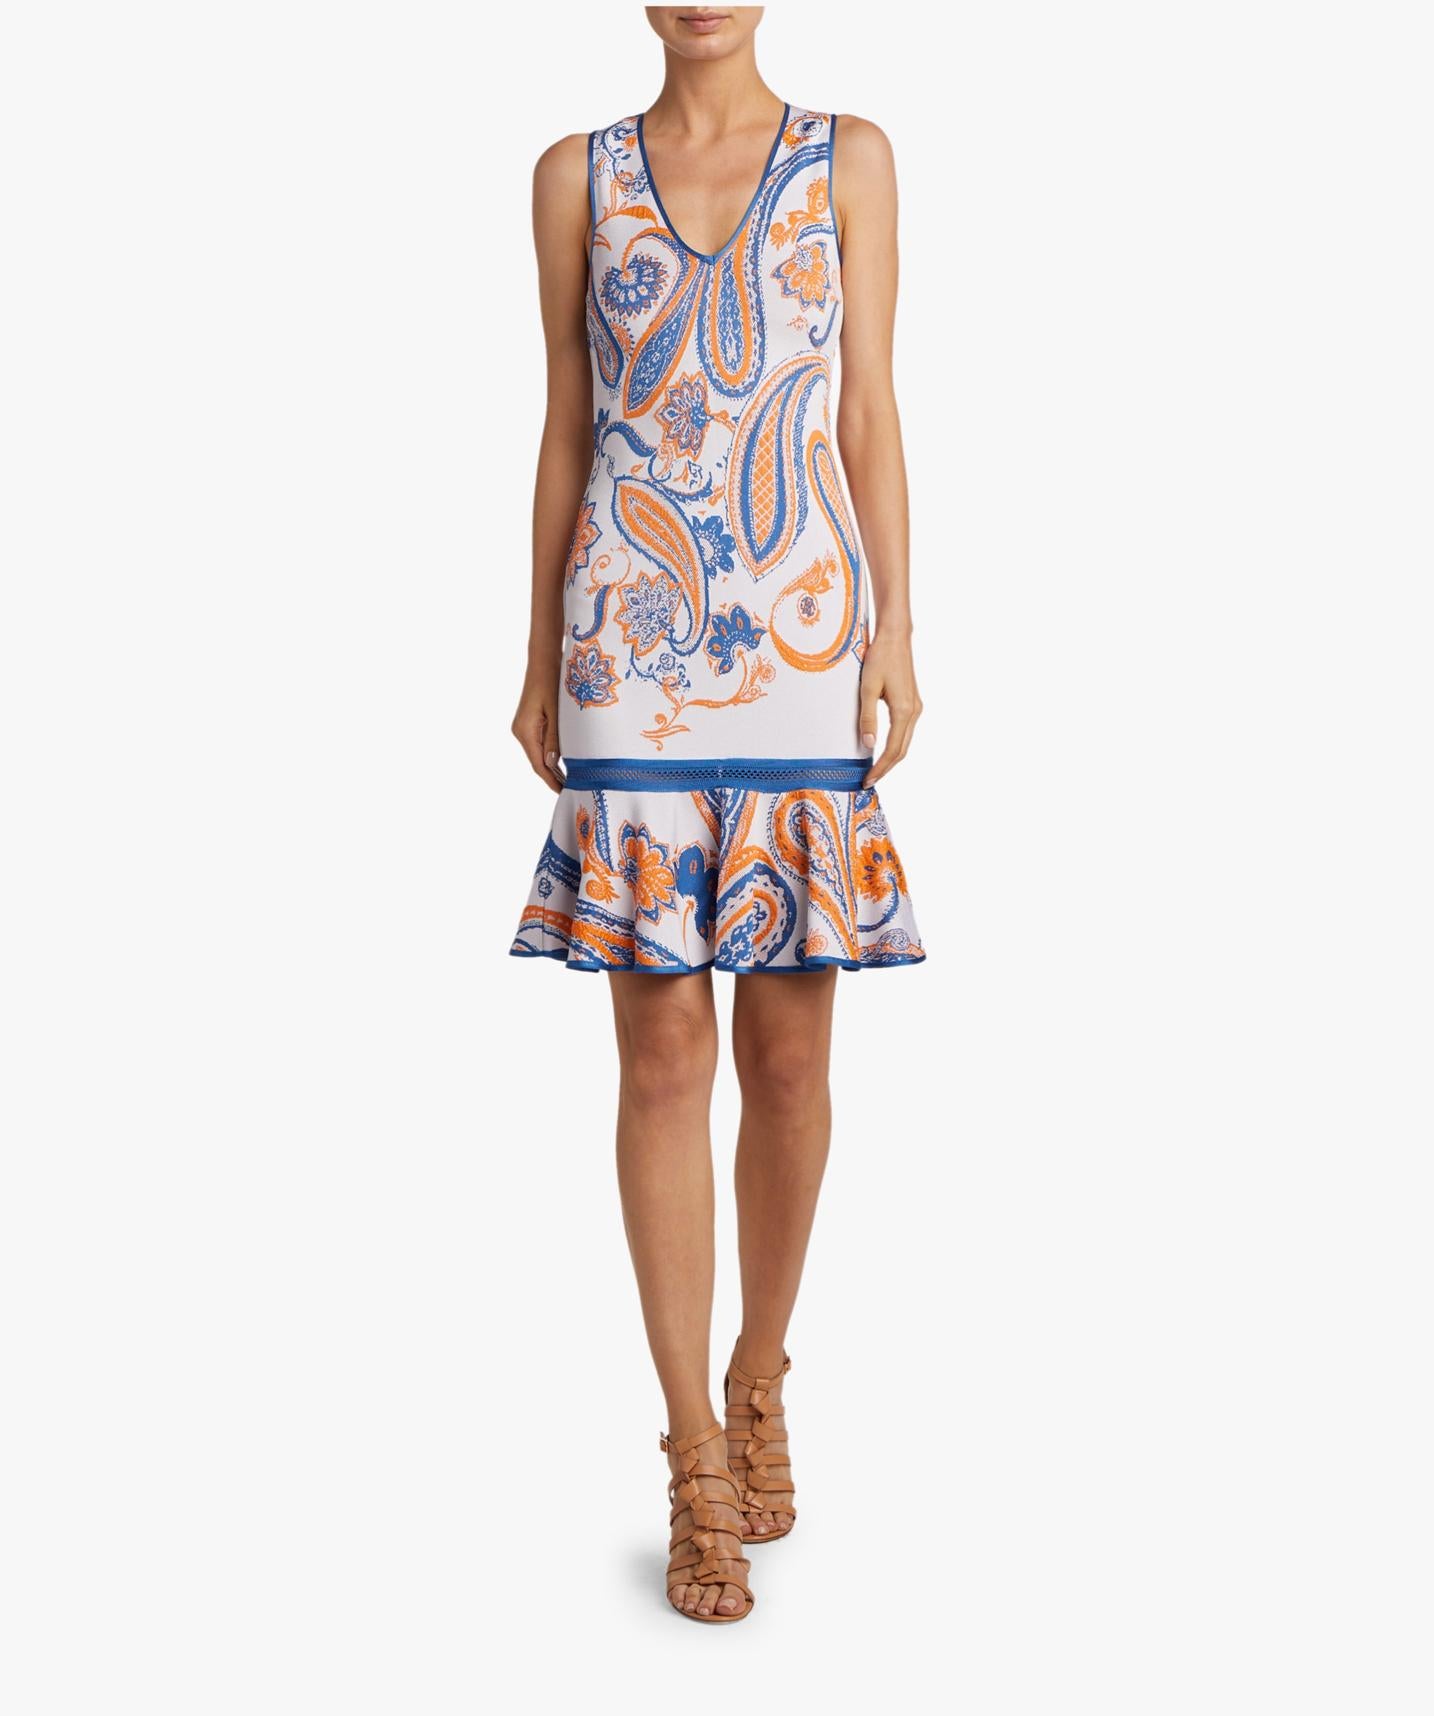 This Roberto Cavalli sleeveless cocktail dress features a vibrant orange and blue paisley print, a V-neckline, and a fitted silhouette with a trumpet hem. It is the perfect dress for a special occasion, day or night. Brand new with tags, however